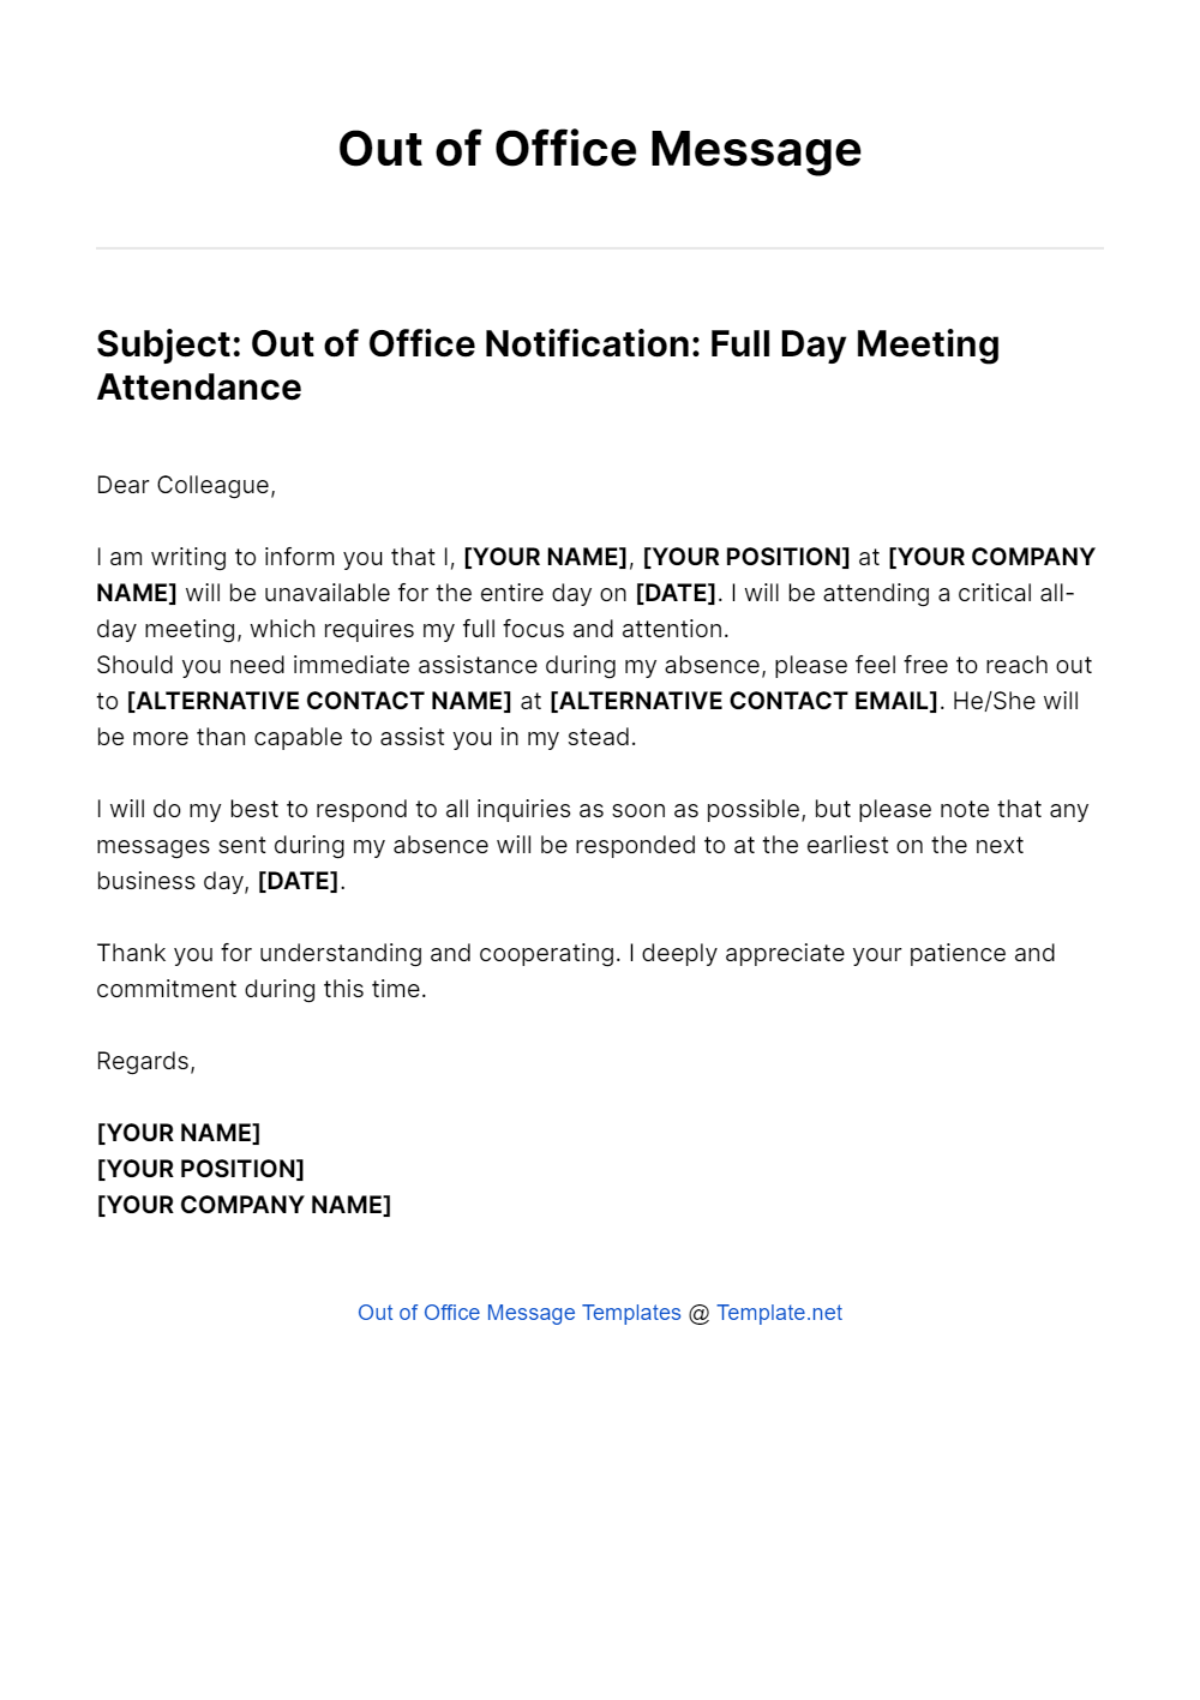 All Day Meeting Out Of Office Message Template